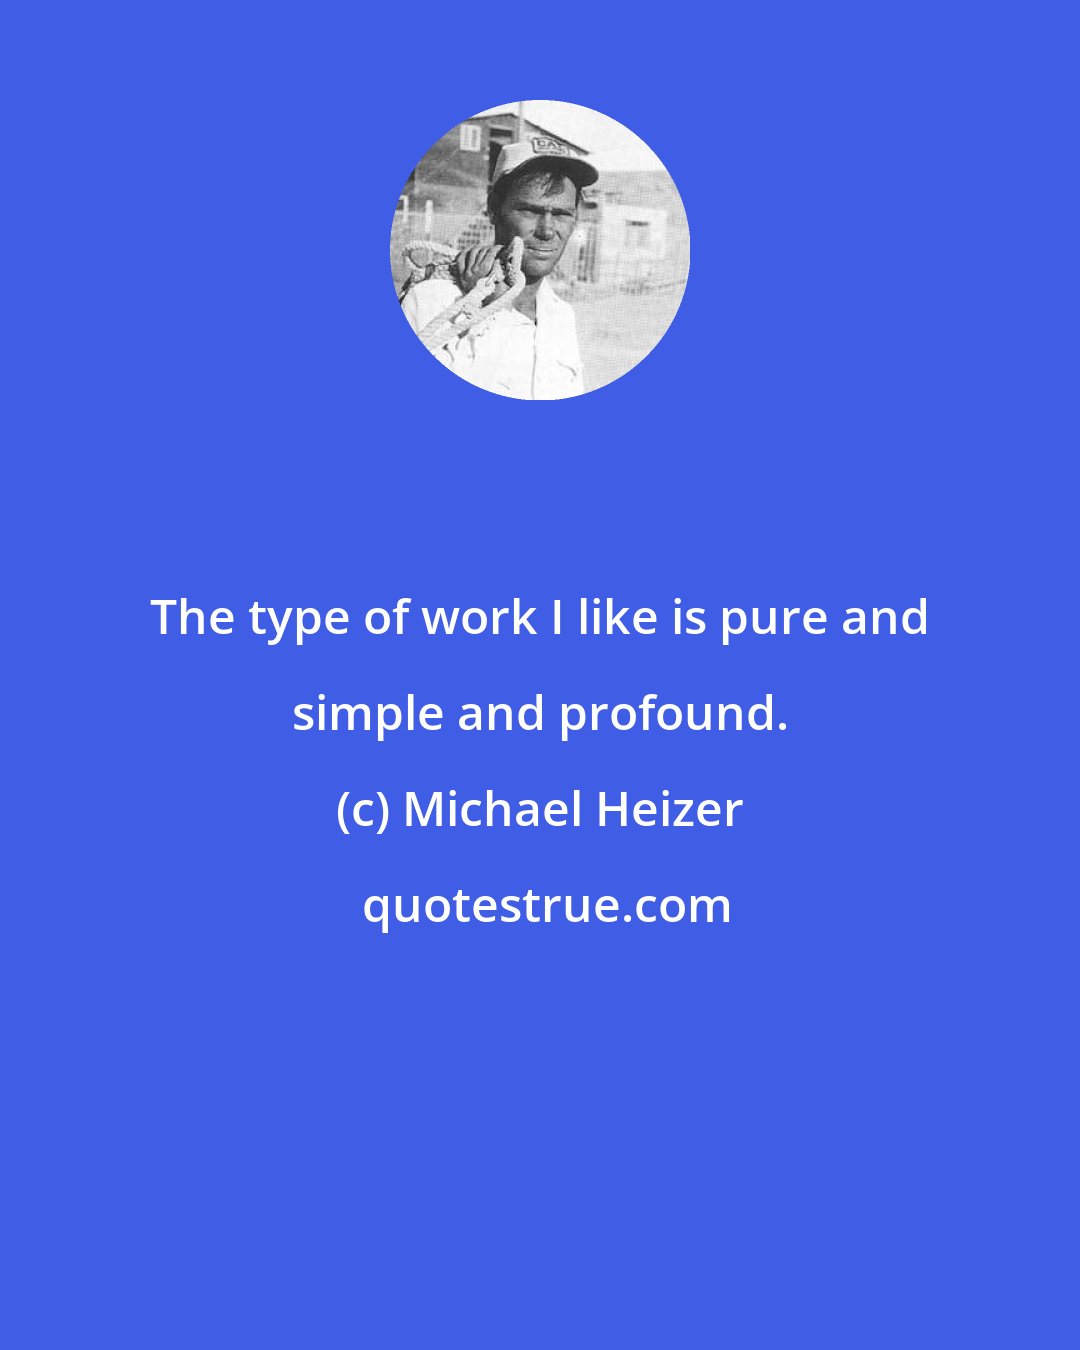 Michael Heizer: The type of work I like is pure and simple and profound.